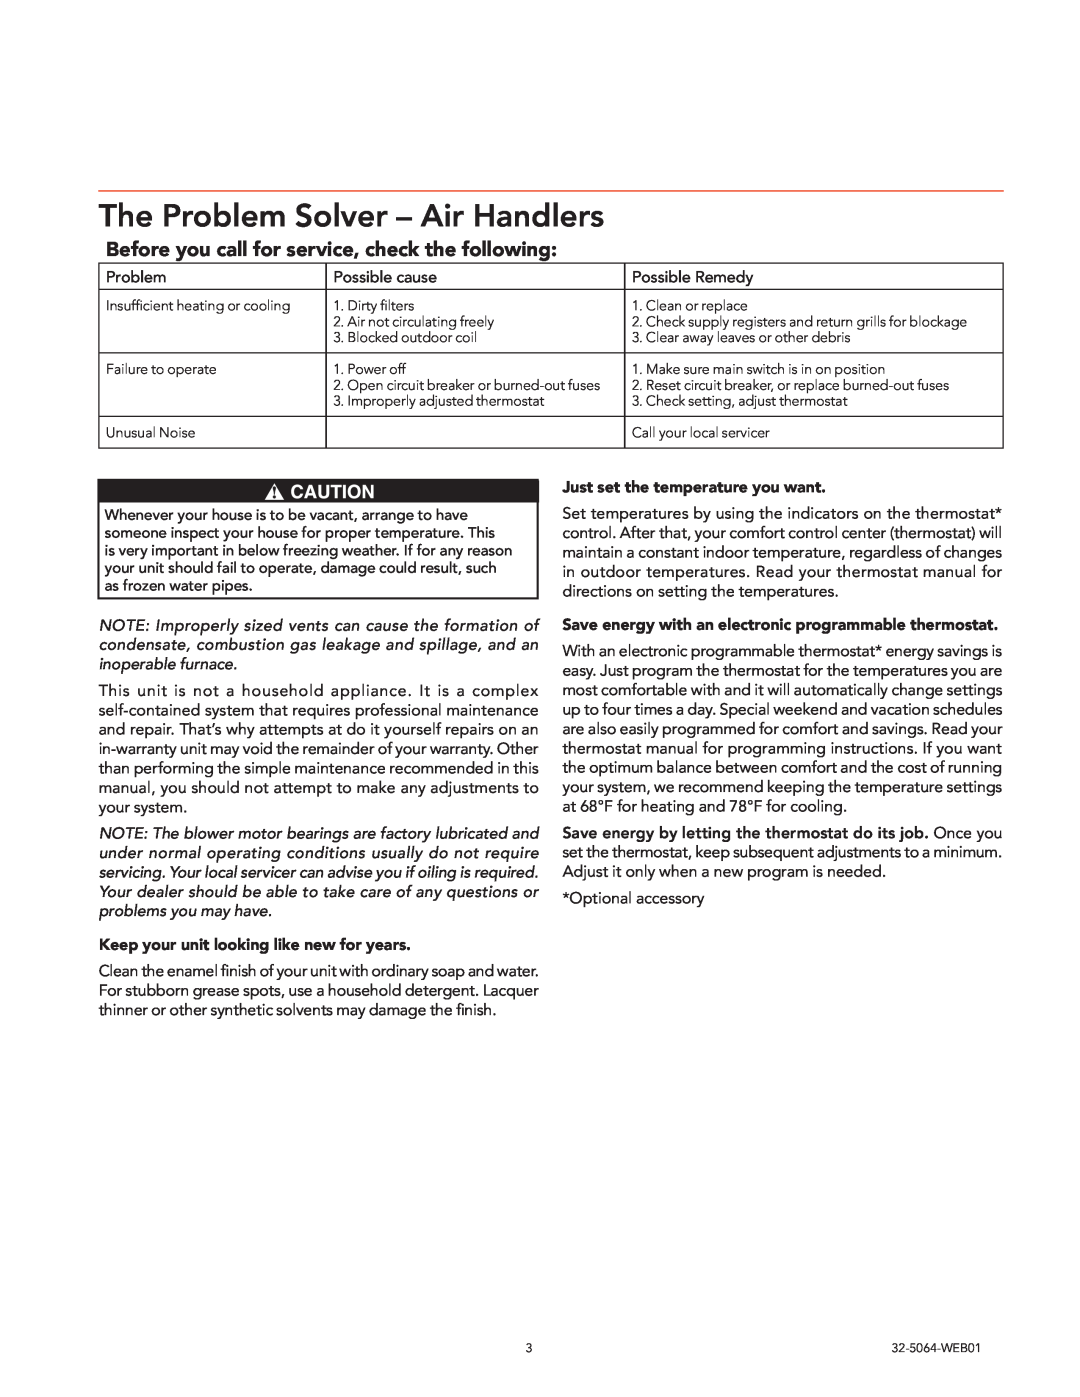 Trane Air Handlers Gas Furnaces manual The Problem Solver - Air Handlers, Before you call for service, check the following 